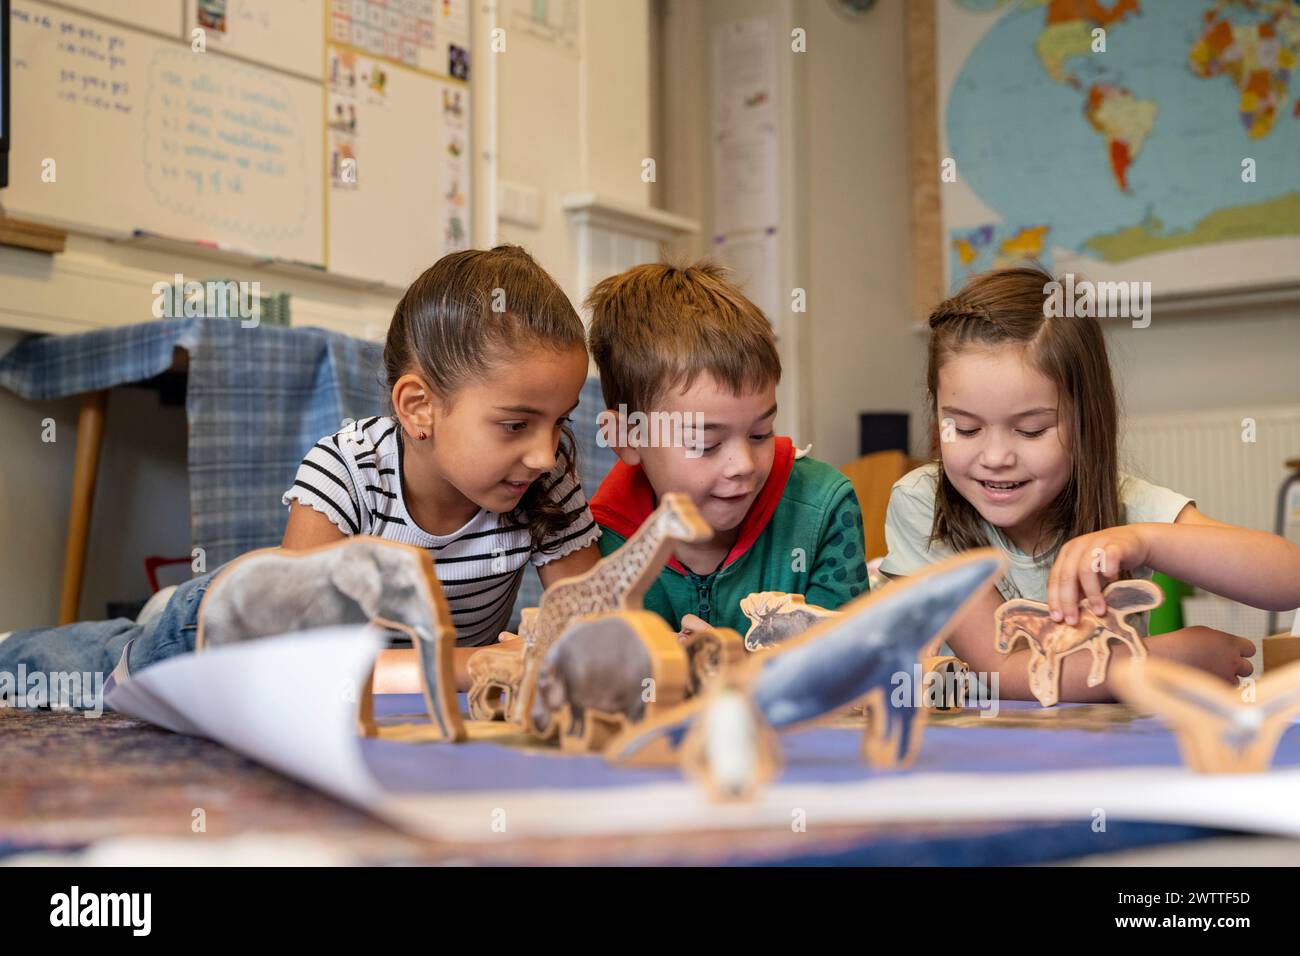 Children engaged in discovering the animal kingdom together Stock Photo